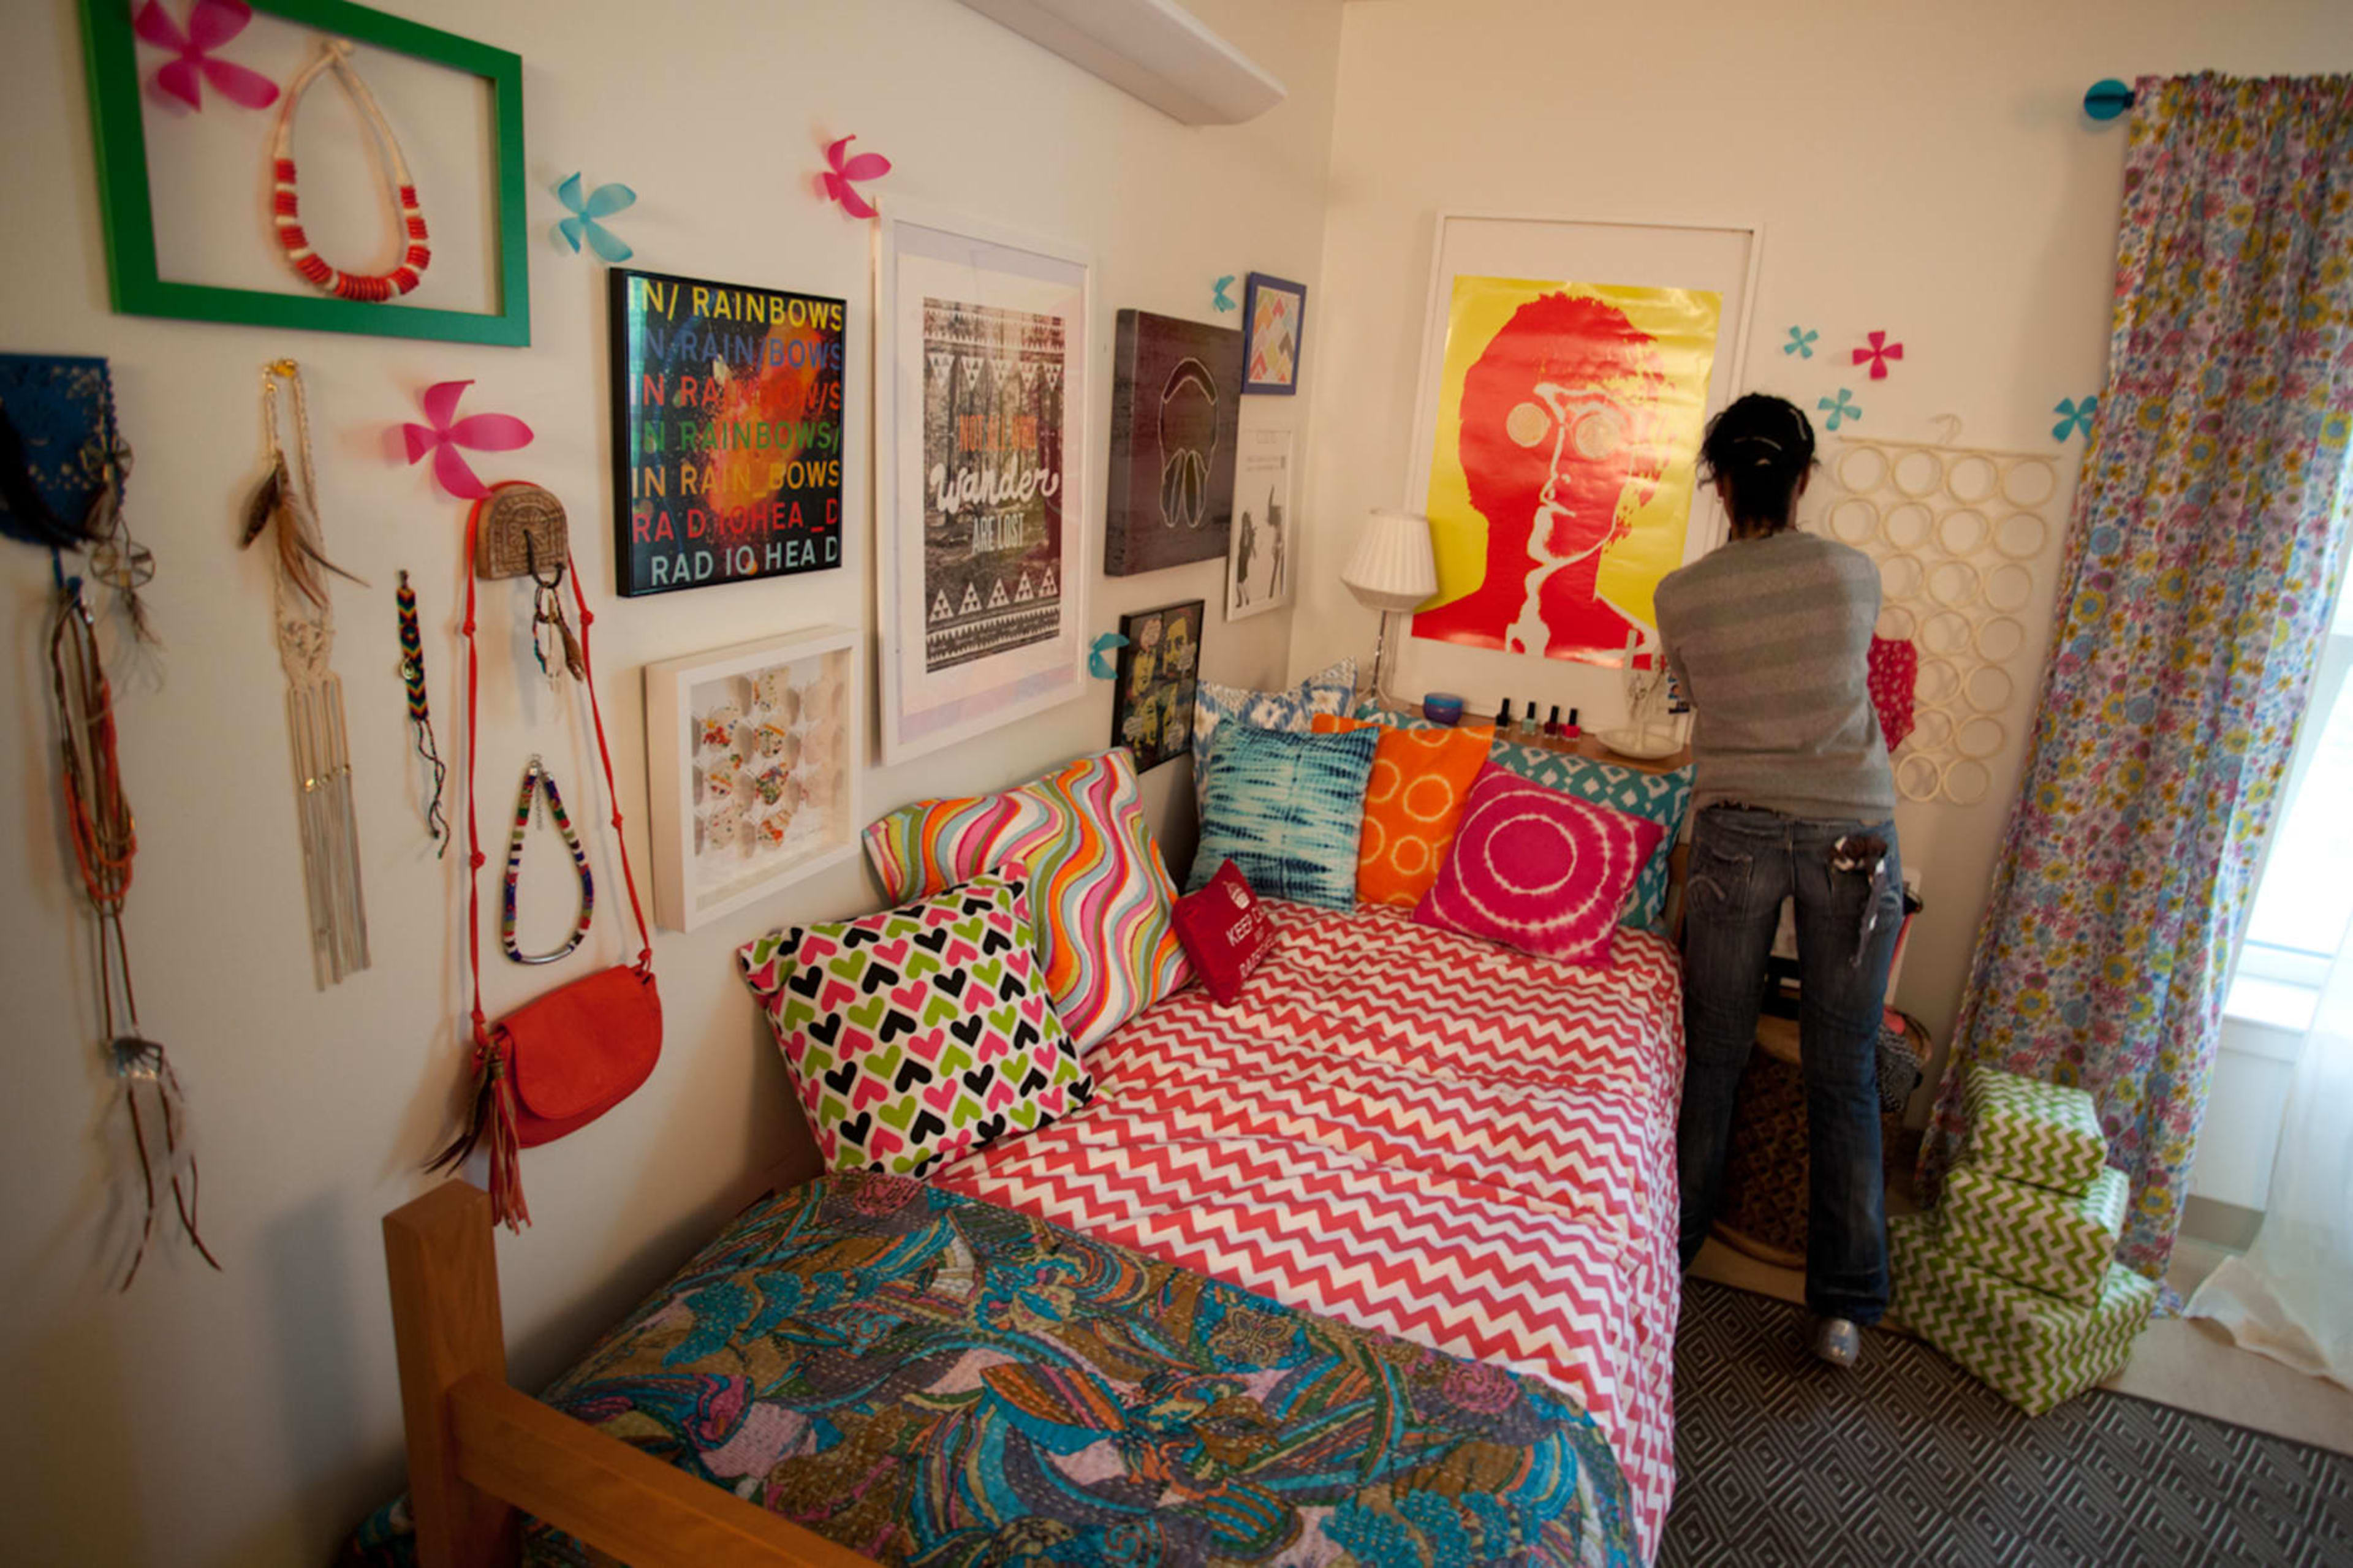 Accommodation for residence hall room at Drew University